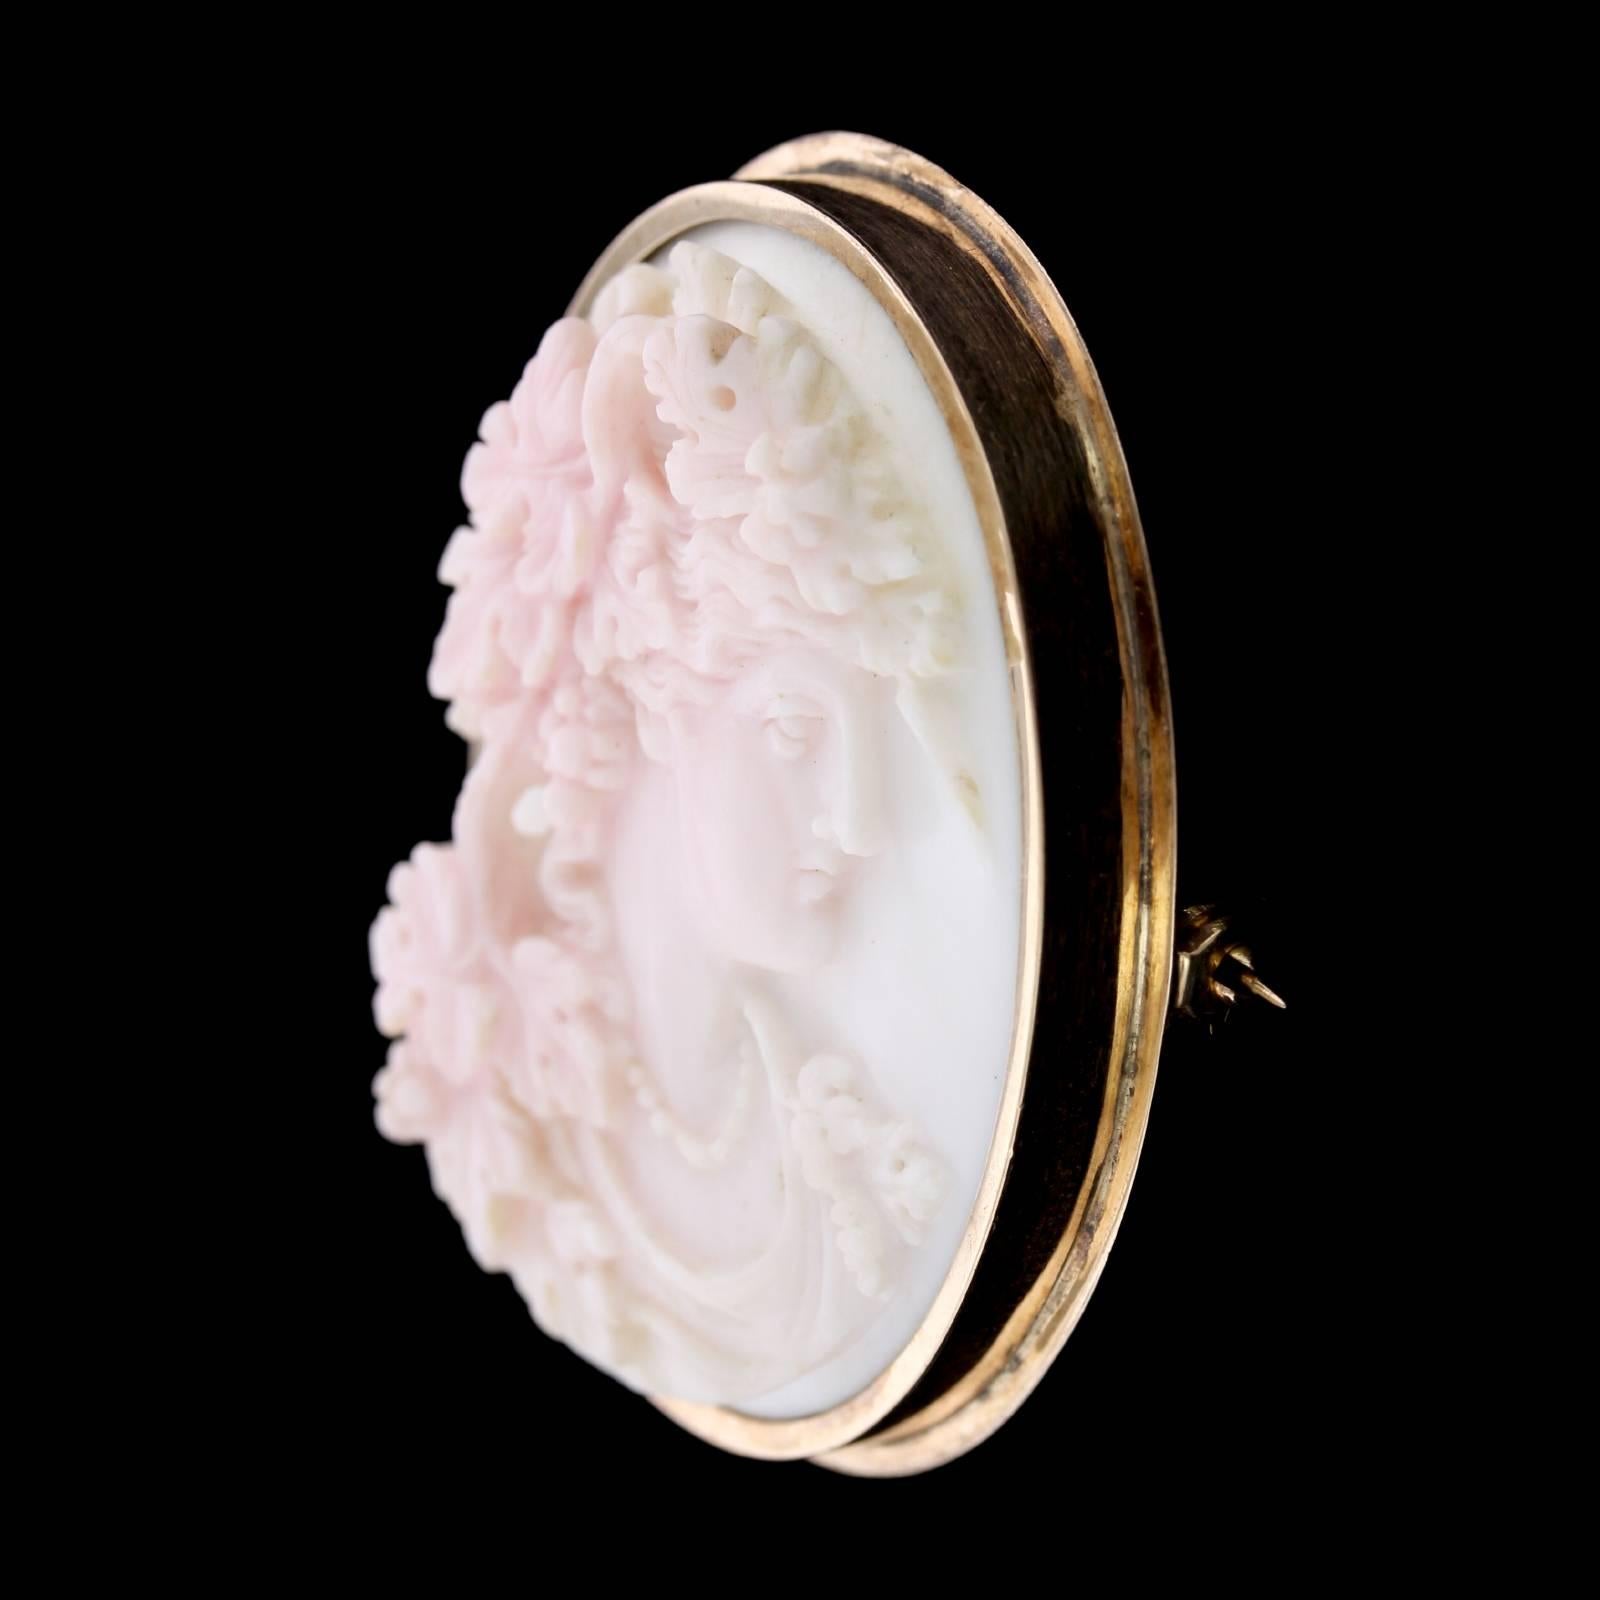 Antique Victorian Carved Coral Cameo Brooch. The brooch is set with a carved coral cameo depicting a woman in profile, measuring 39.00 x 31.00mm., length 1 3/4